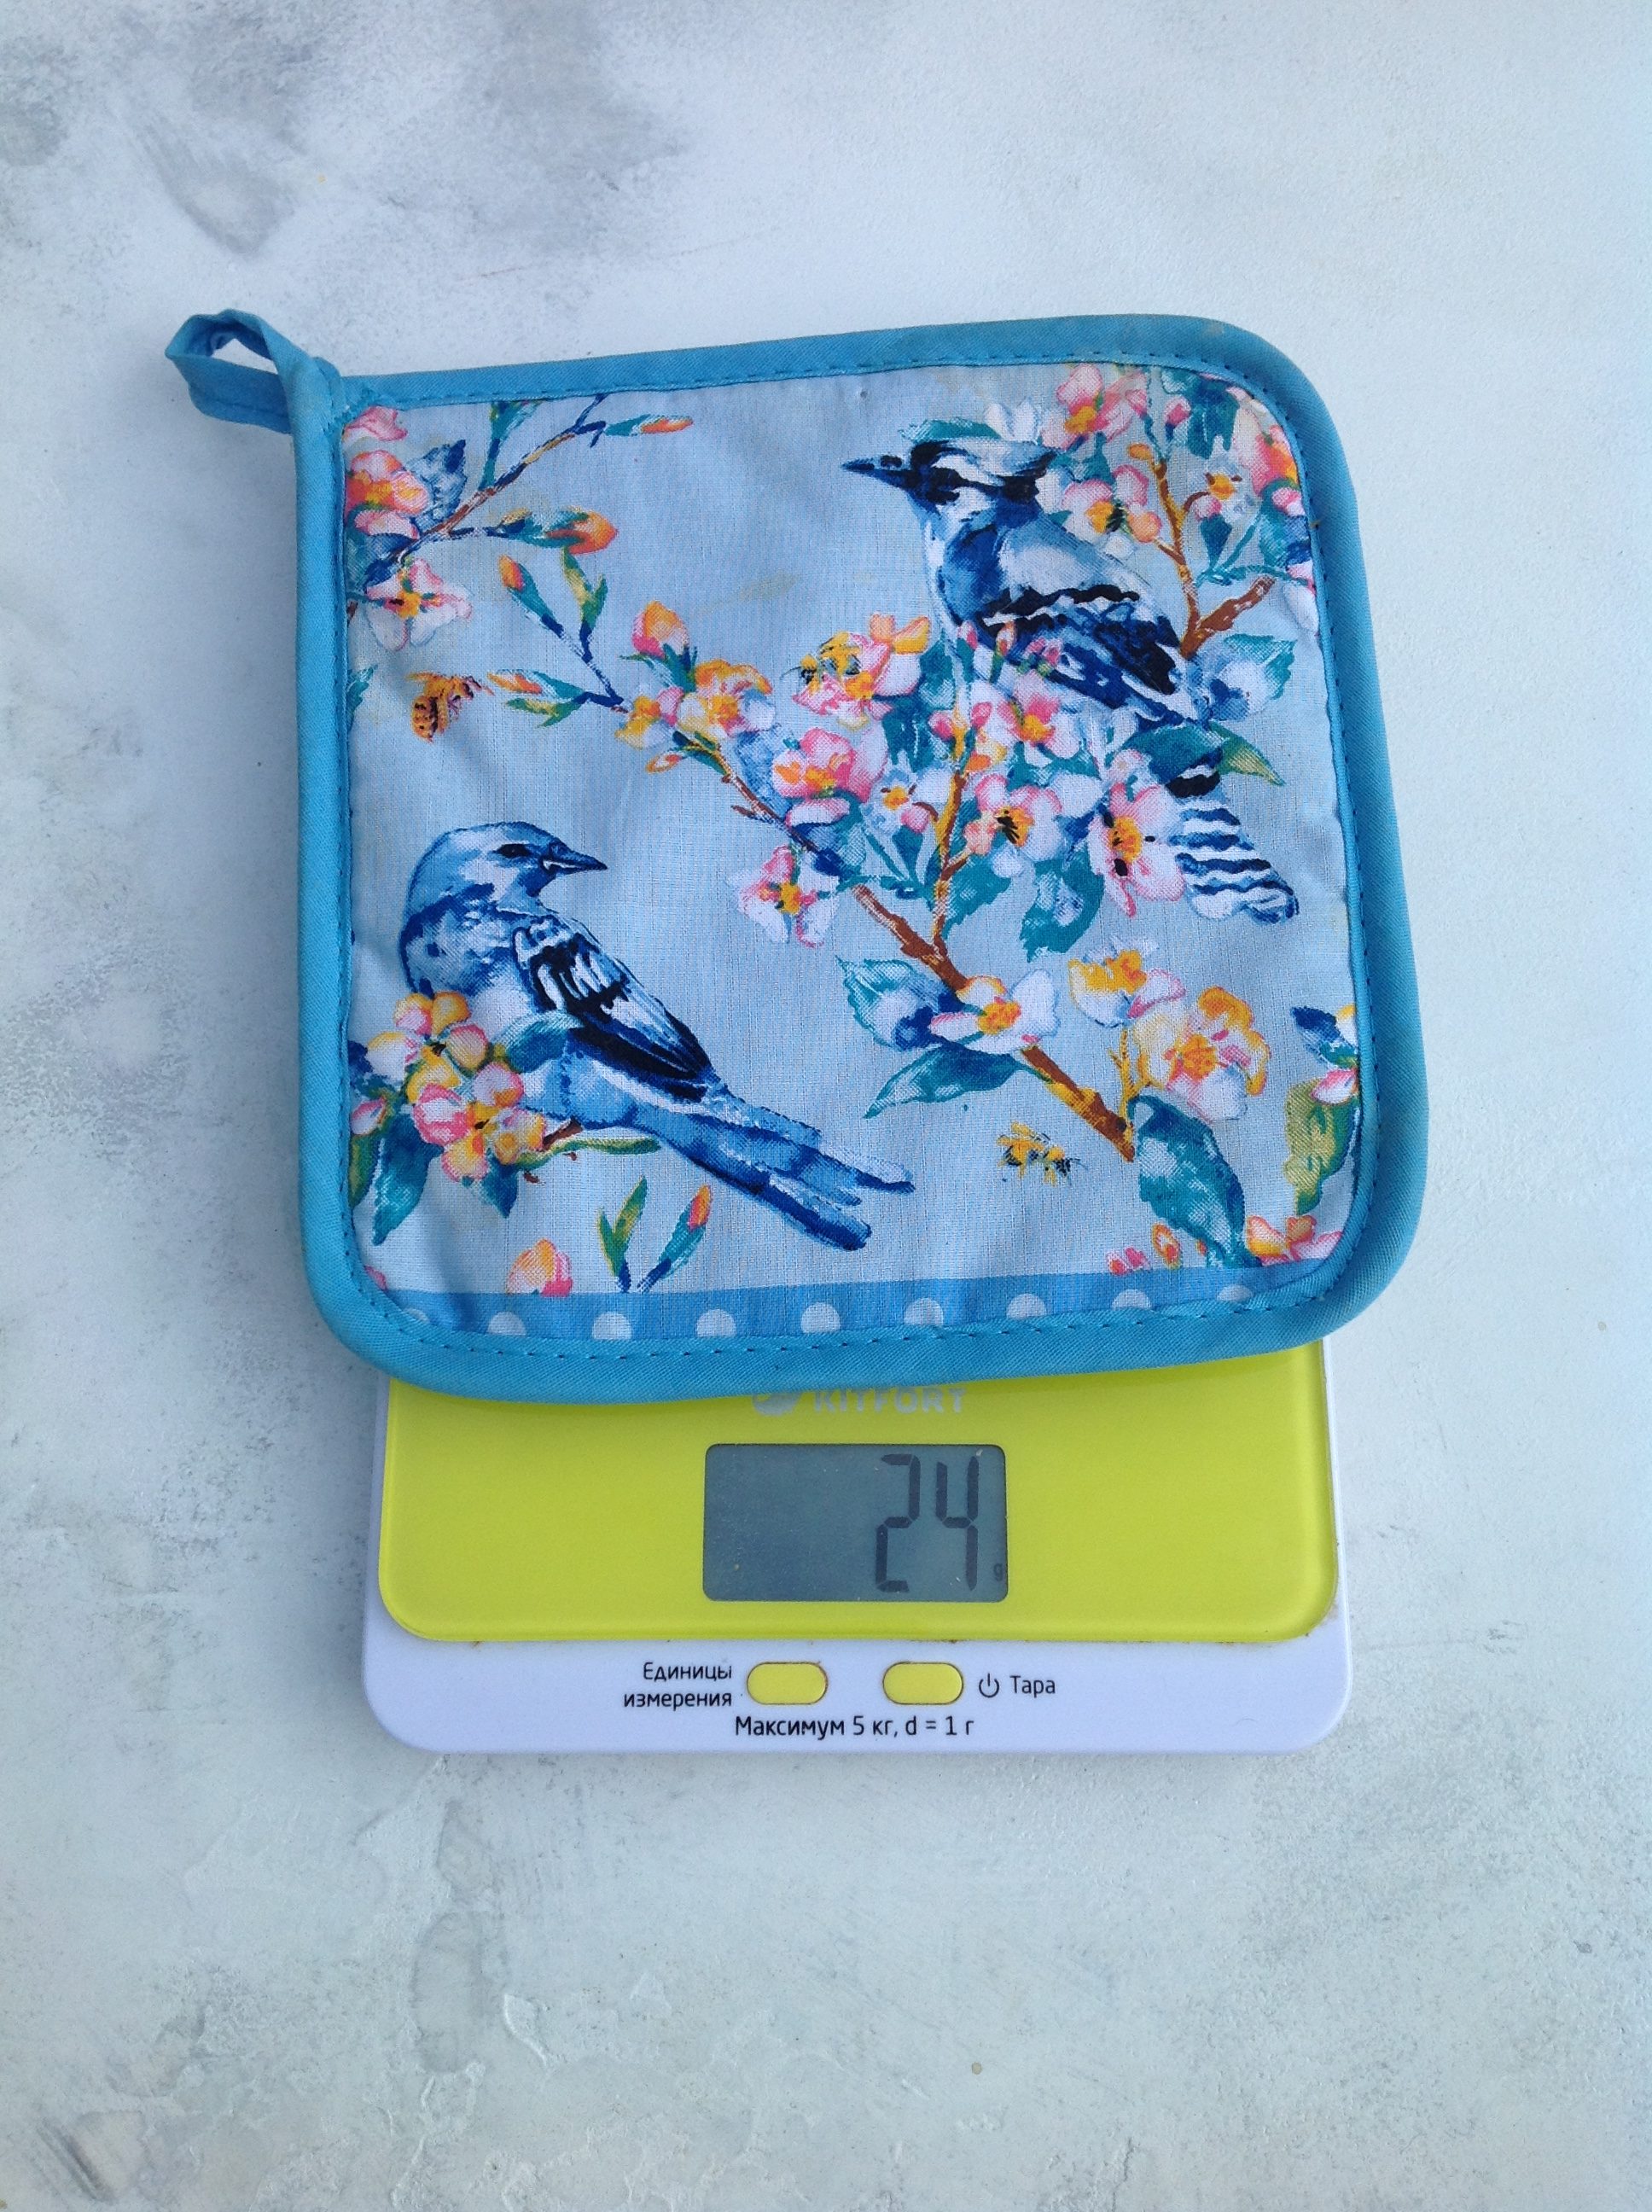 weight of kitchen potholder for hot square